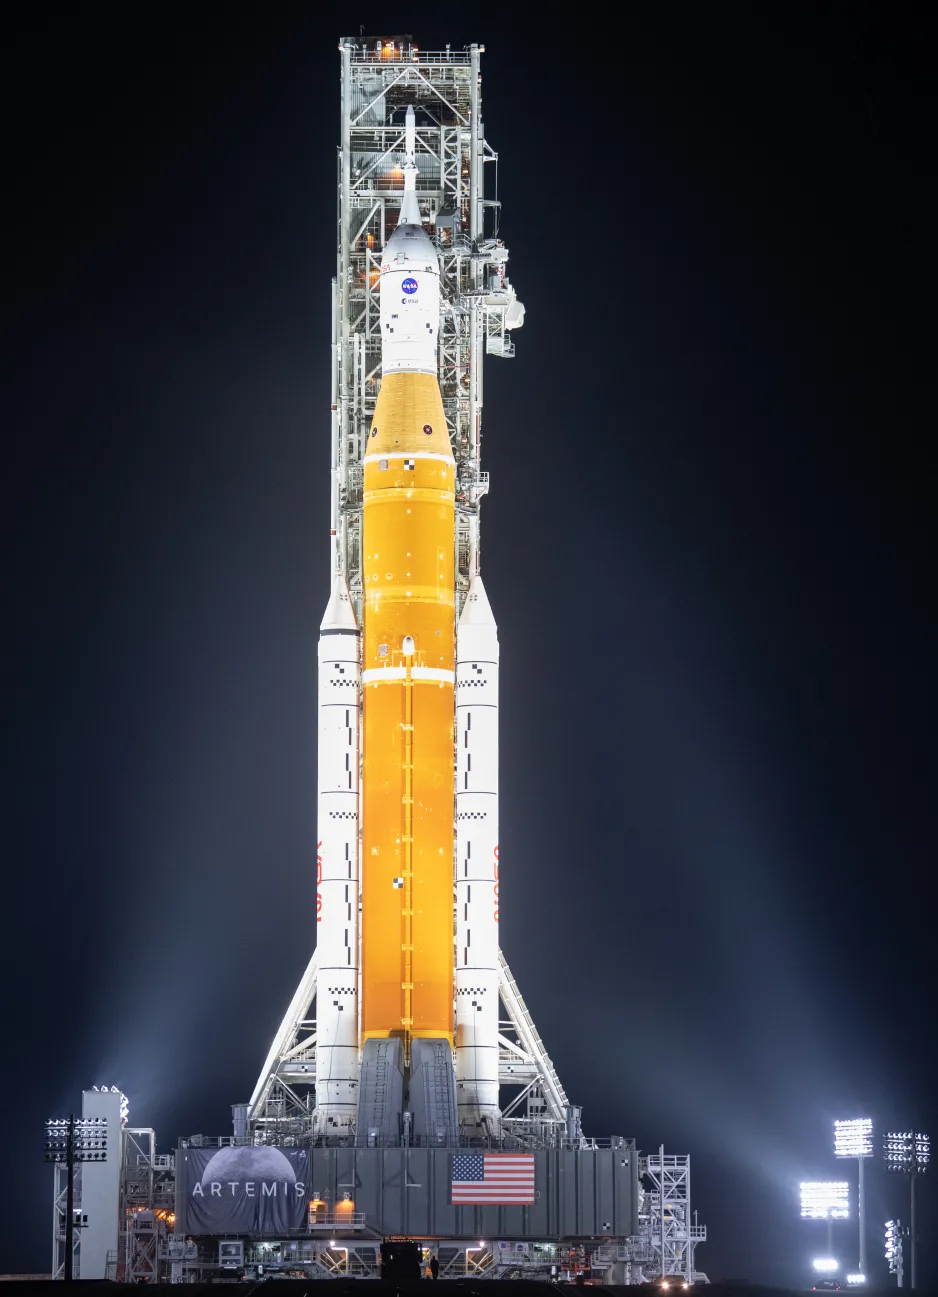 A huge orange rocket core stands between two white rocket boosters on a mobile launch vehicle, illuminated by spotlights against a black background.